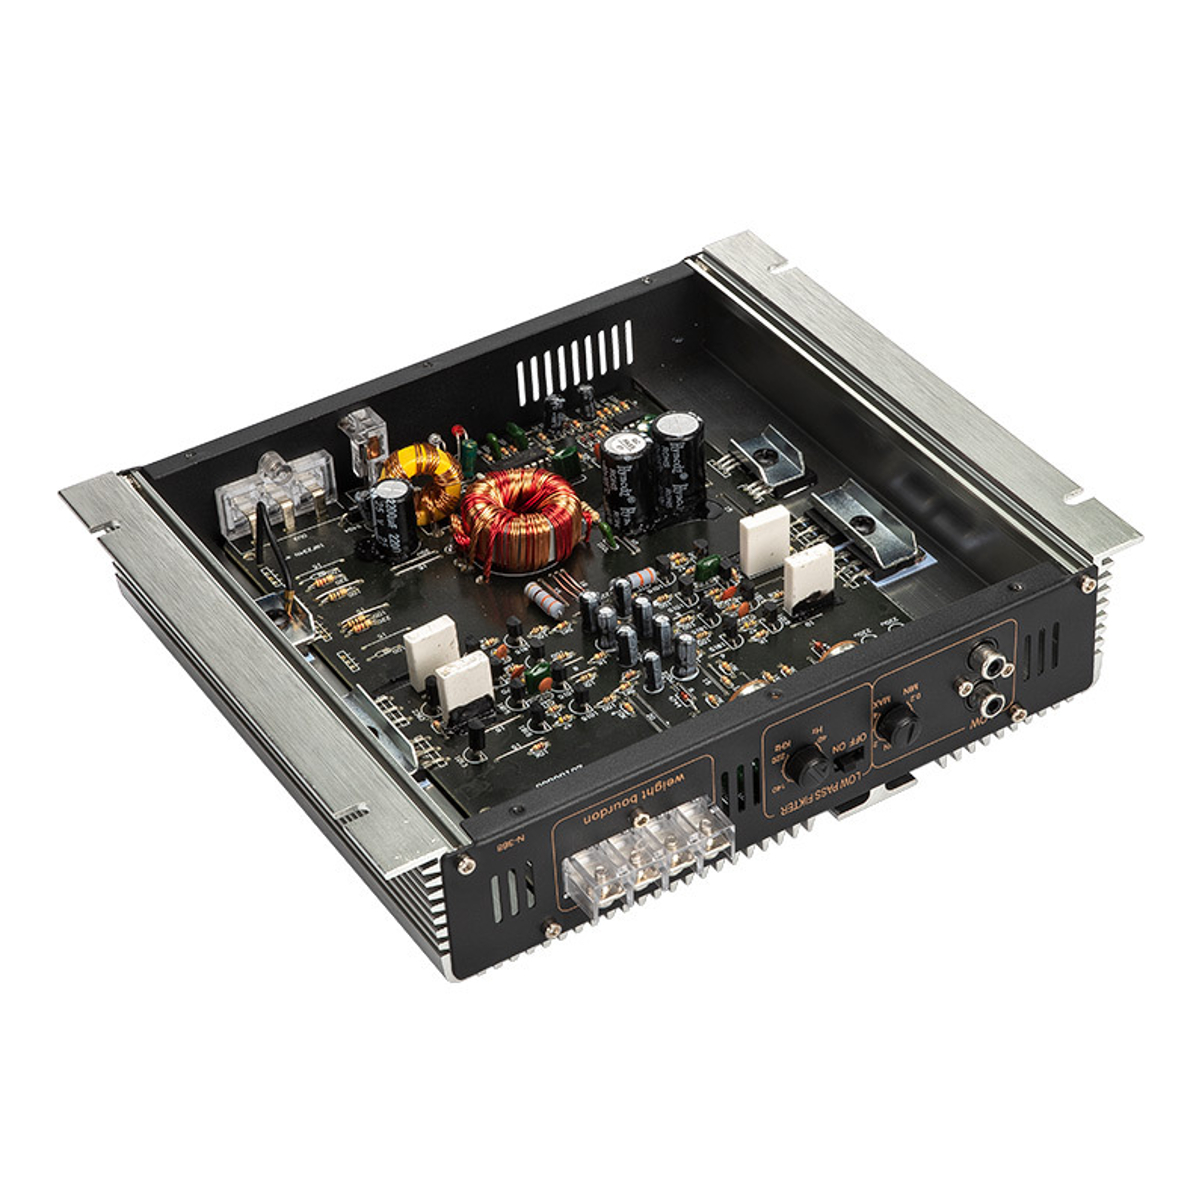 N368 12V 2200W Car Audio Stereo Power Amplifier 2 Channel Class A/B Stereo Surround Subwoofer FM - Auto GoShop